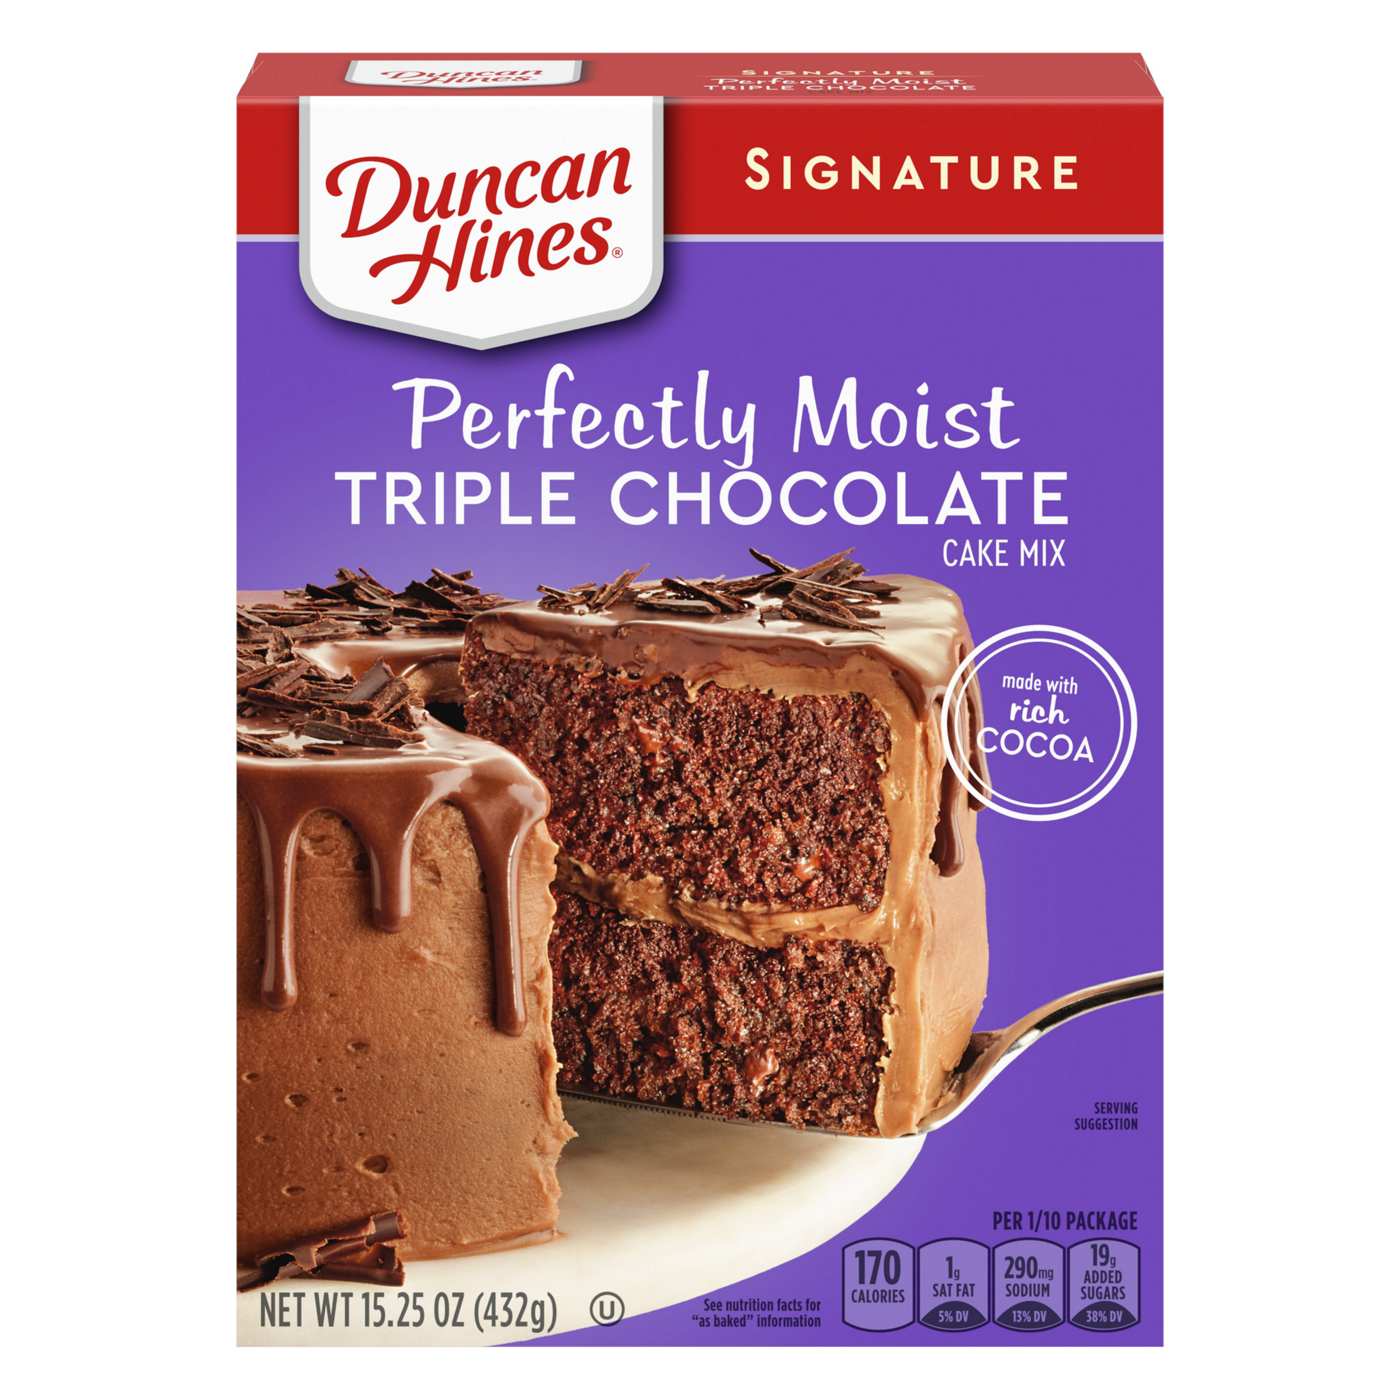 Duncan Hines Signature Perfectly Moist Triple Chocolate Cake Mix; image 1 of 3